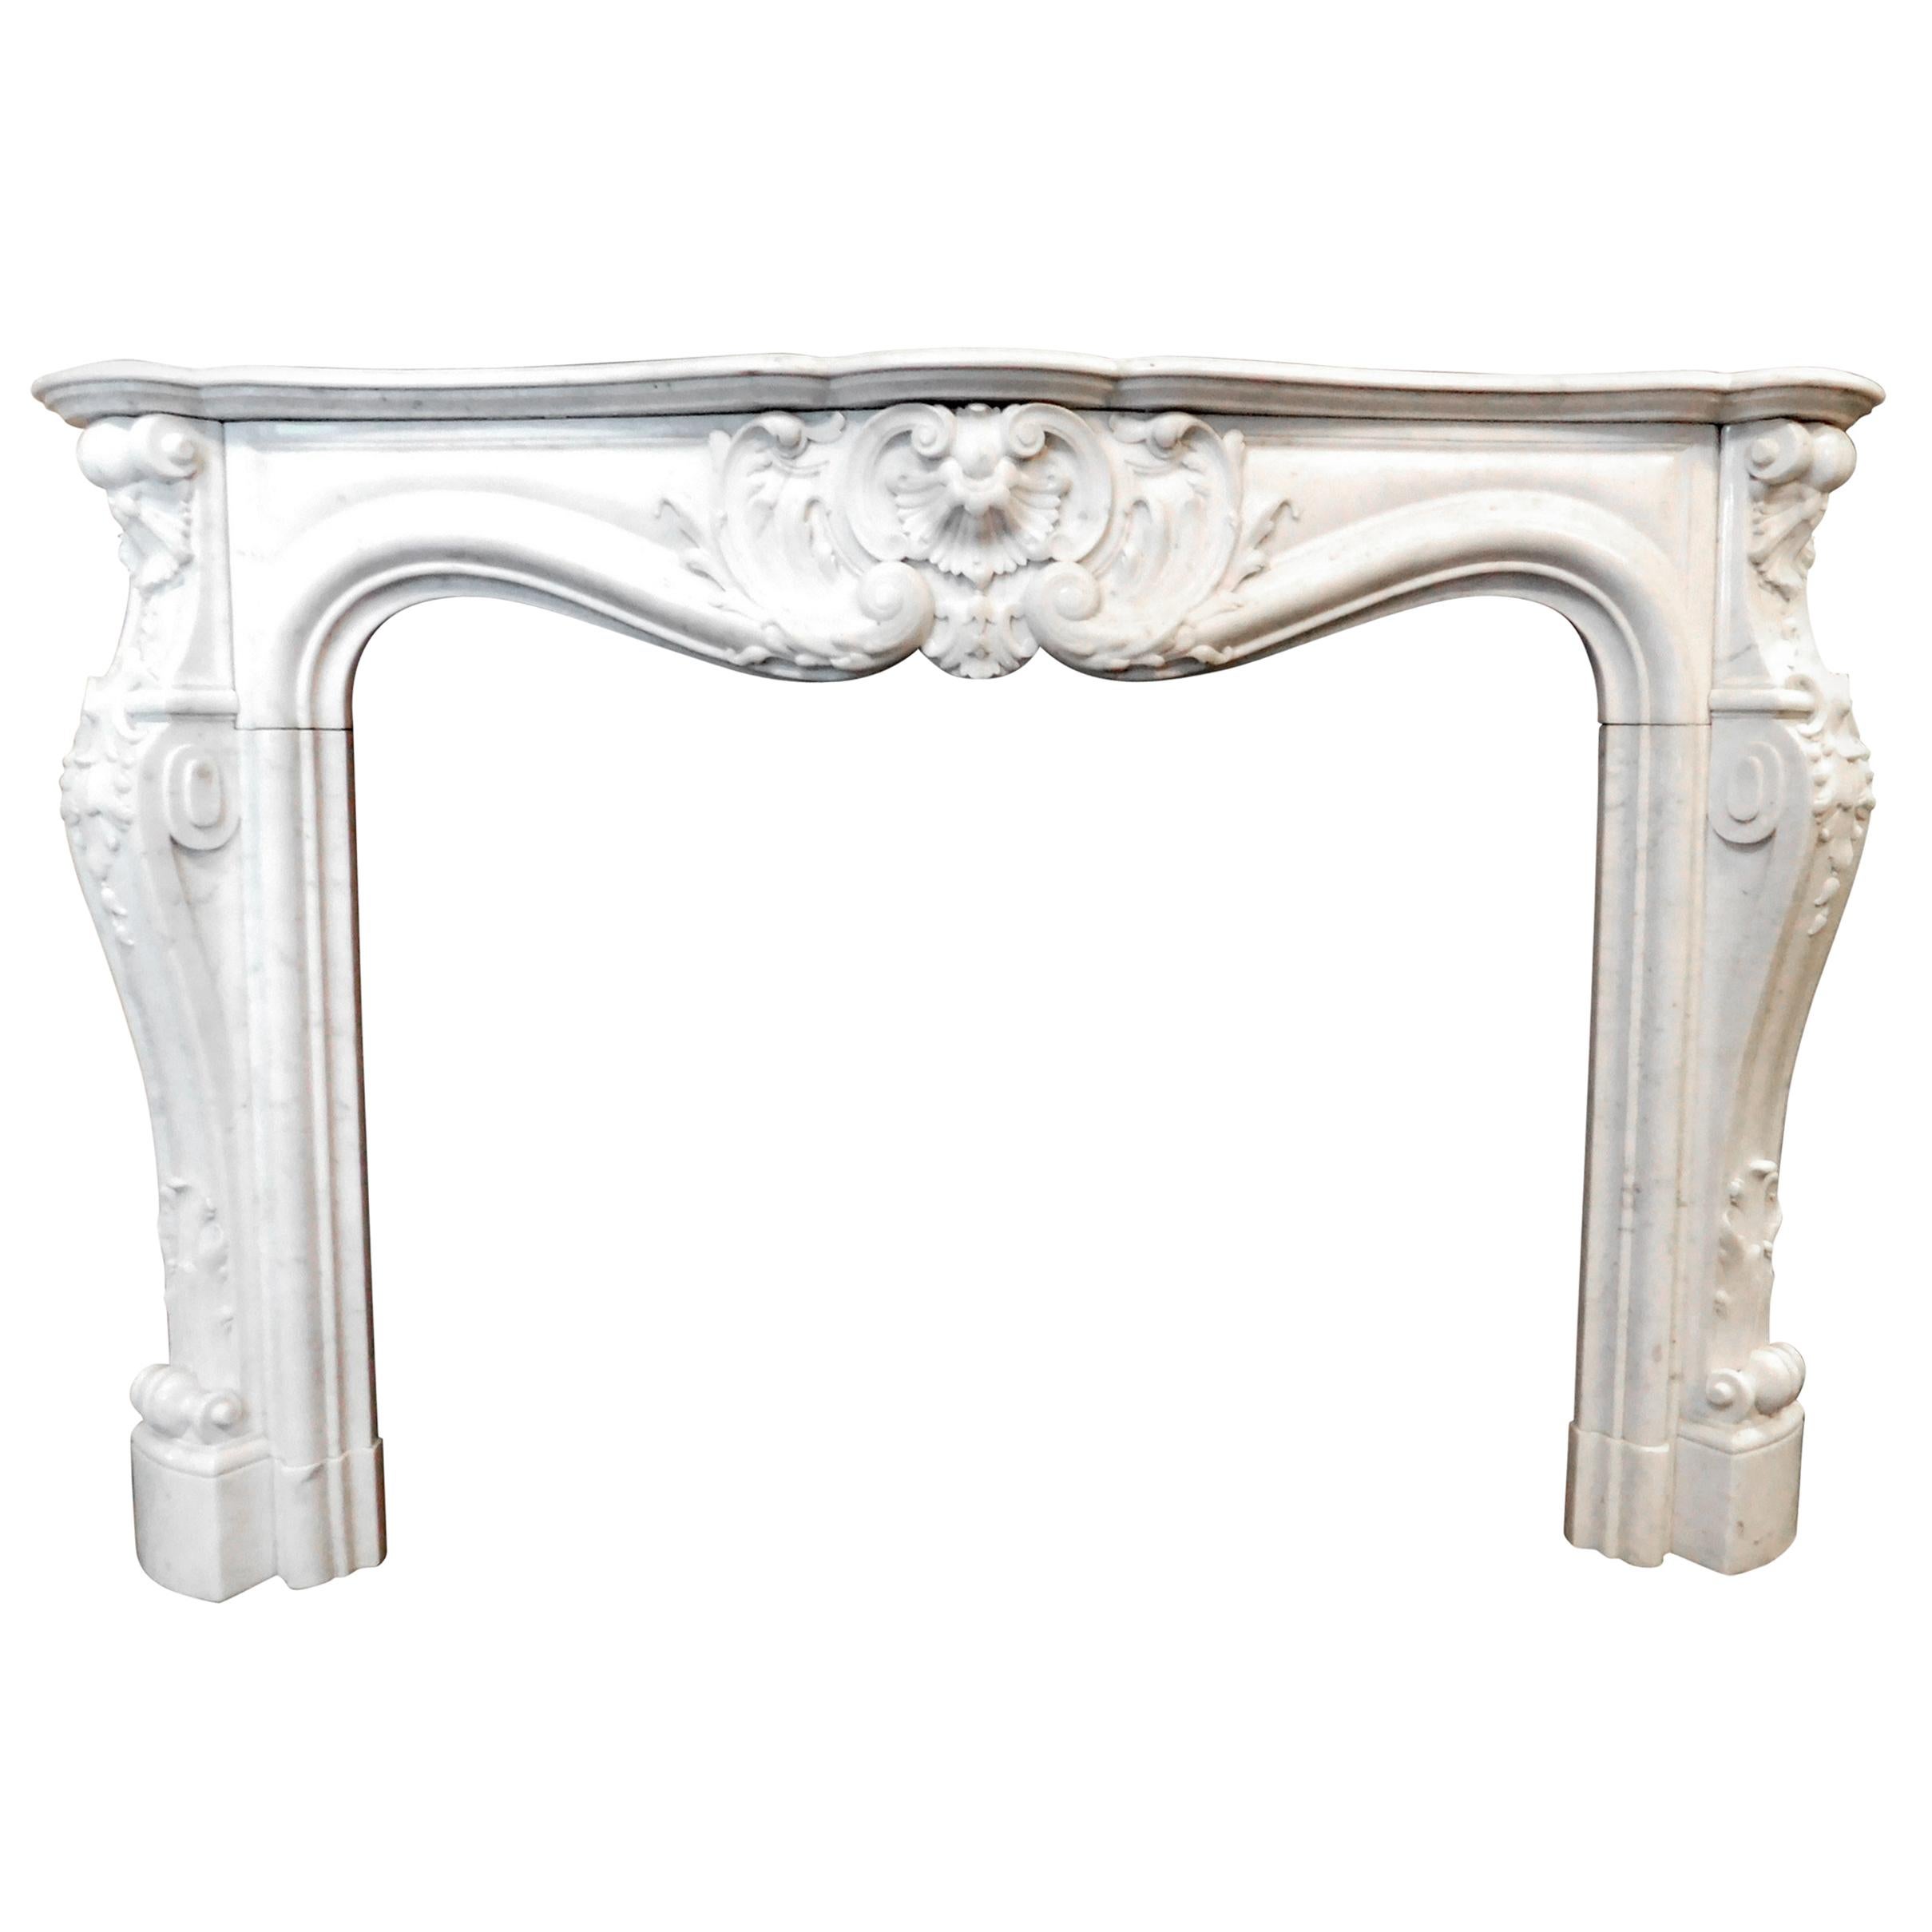 Antique Louis XV Fireplace, Richly Carved White Marble, 1700 Paris 'France'